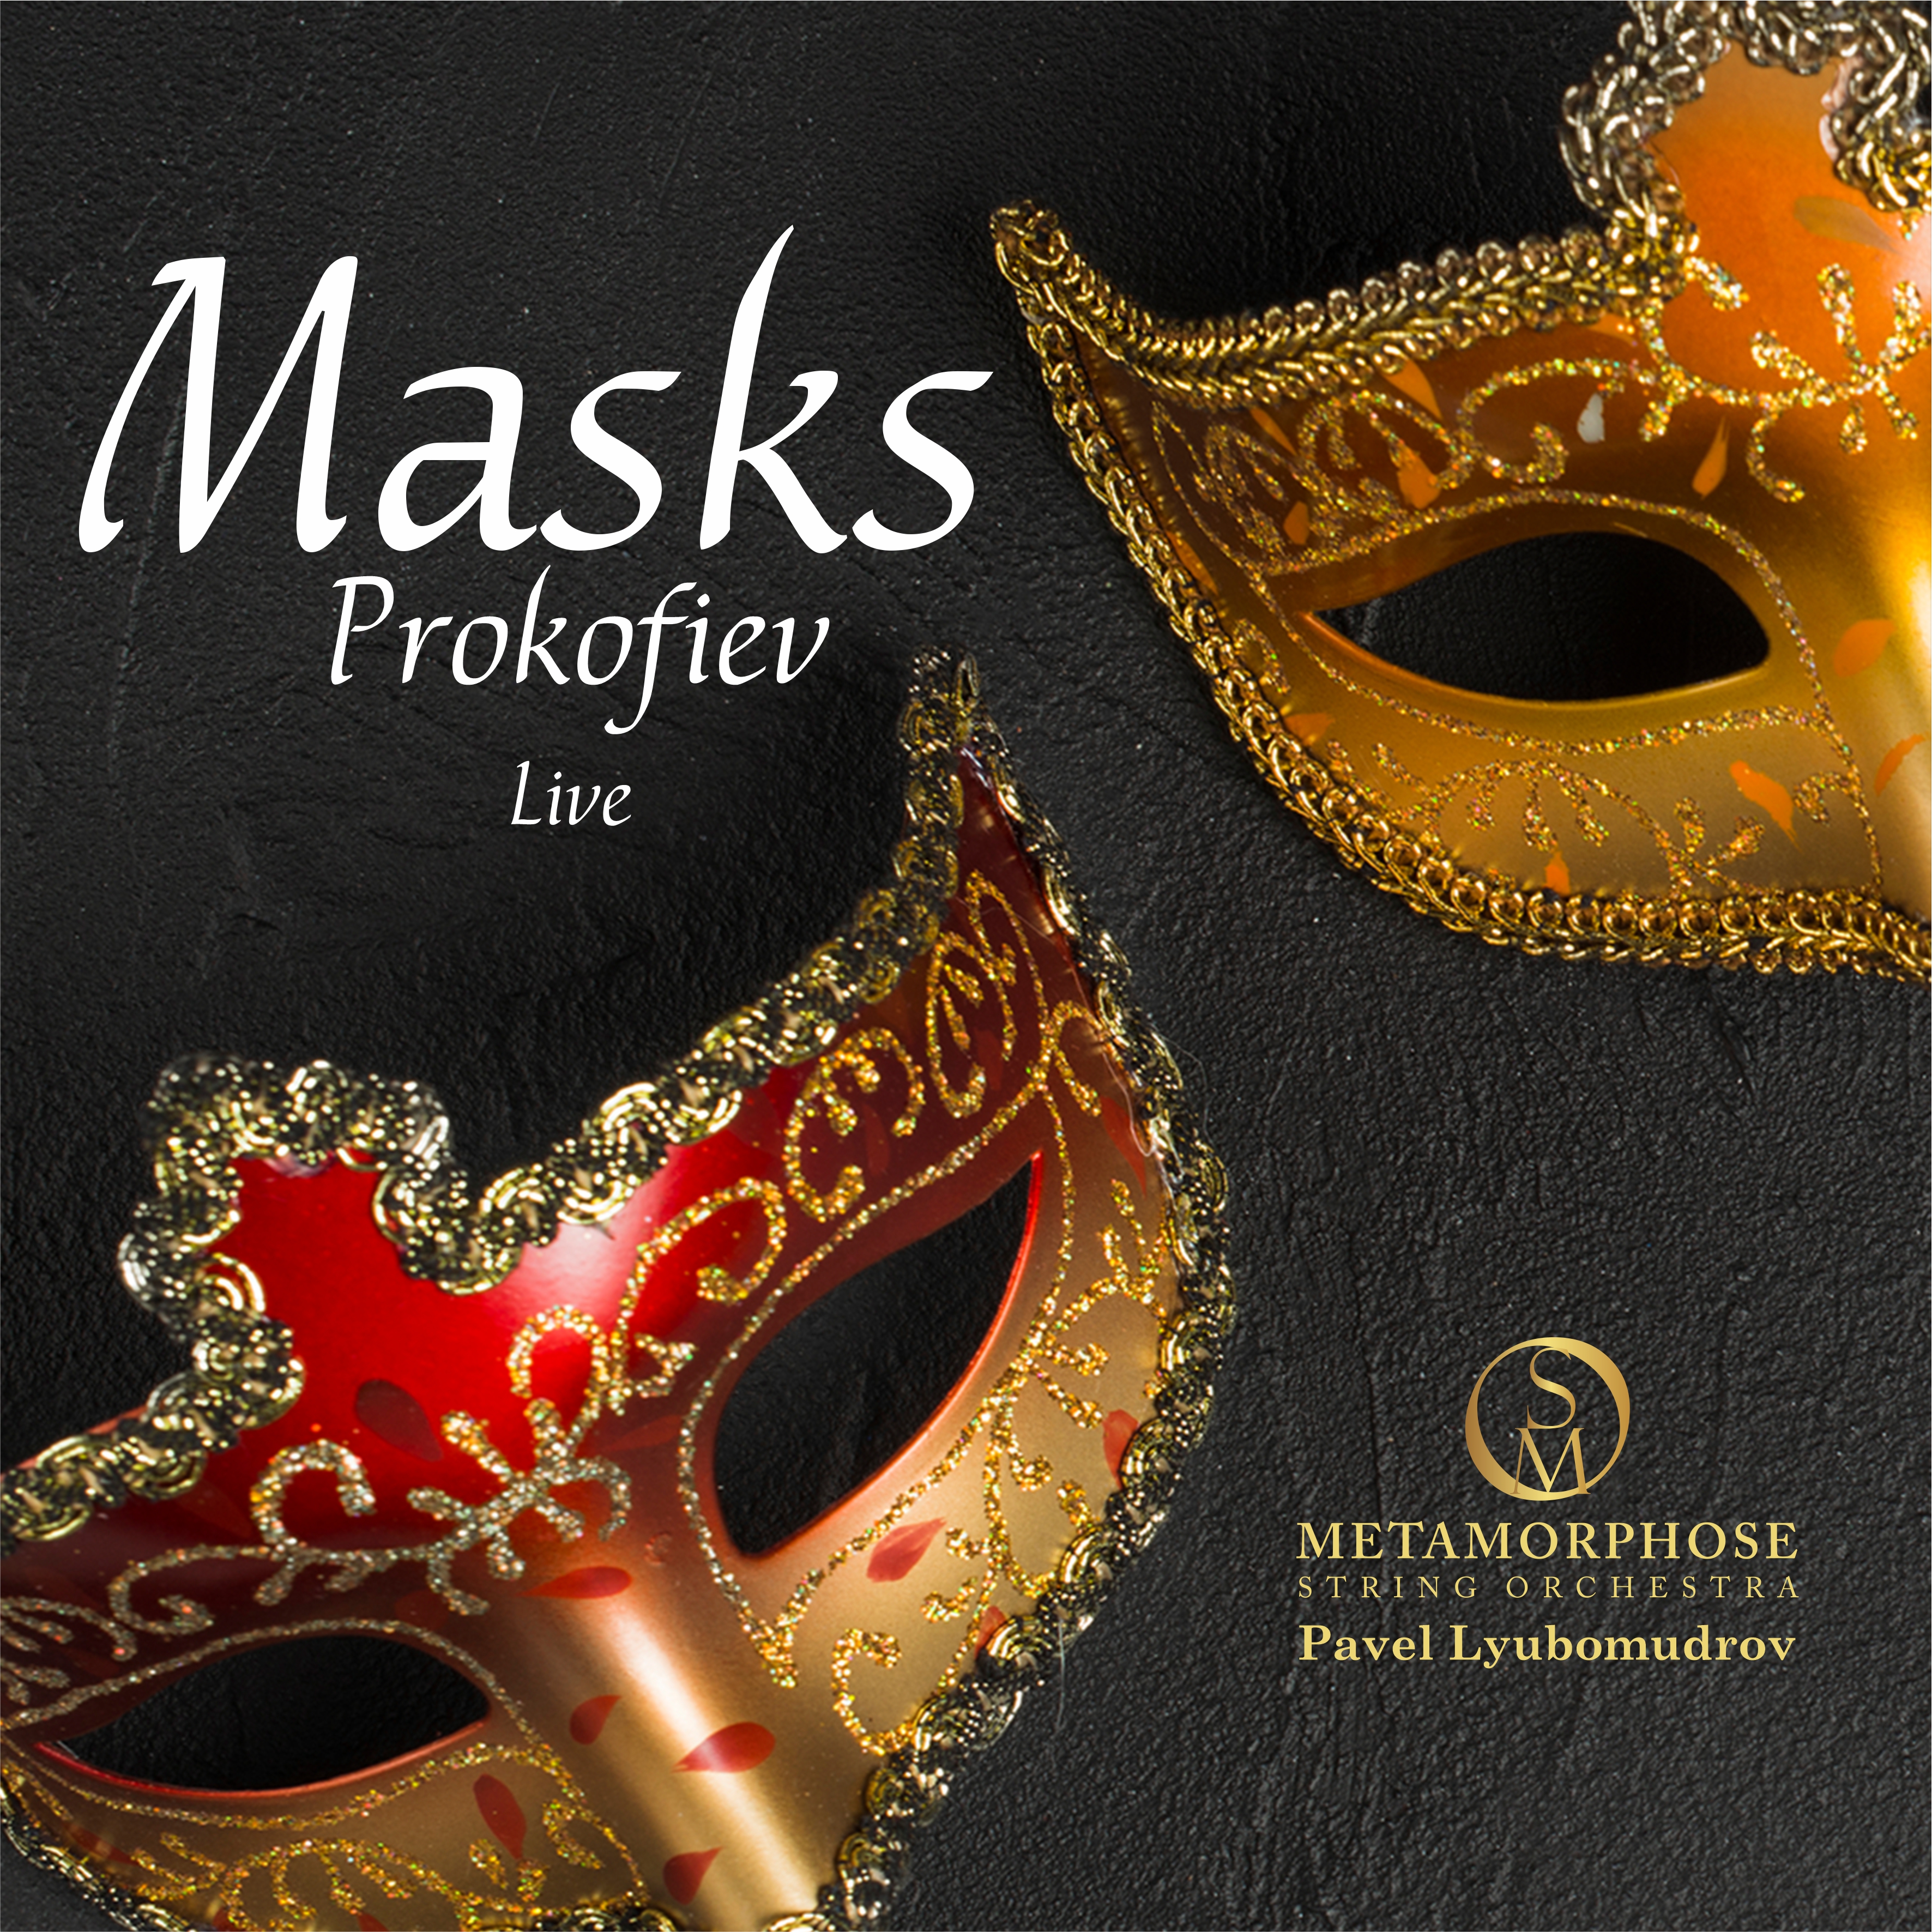 10 Pieces from Romeo and Juliet, Op. 75: No. 4, Masks (Live)